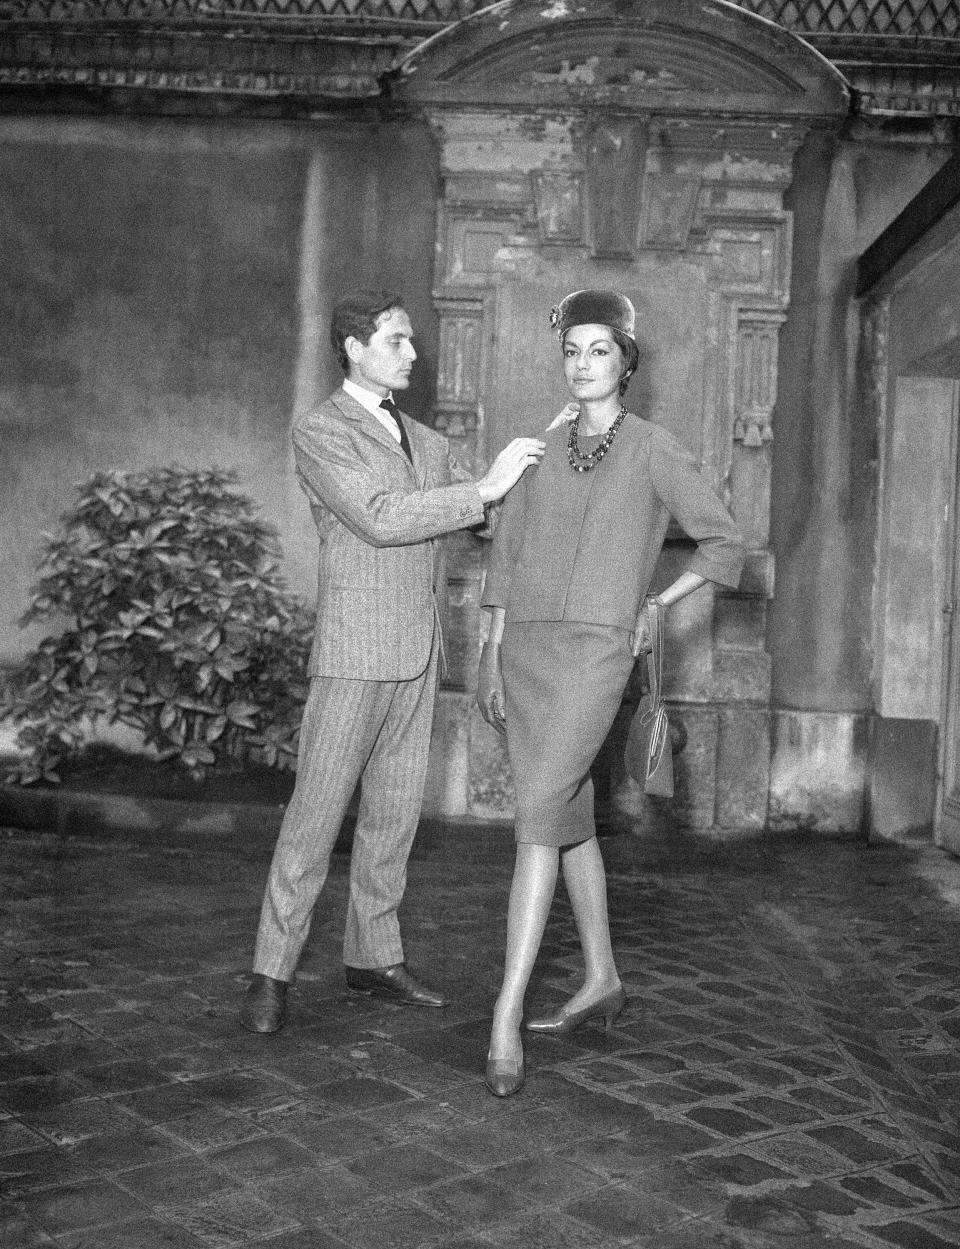 FILE - In this Sept.13, 1960 file photo, Parisian designer Pierre Cardin, with one of his models, shows the new uniform he has created for the hostesses of French television in Paris. France's Academy of Fine Arts says famed fashion designer Pierre Cardin has died at 98 (AP Photo/Pierre Godot, File)